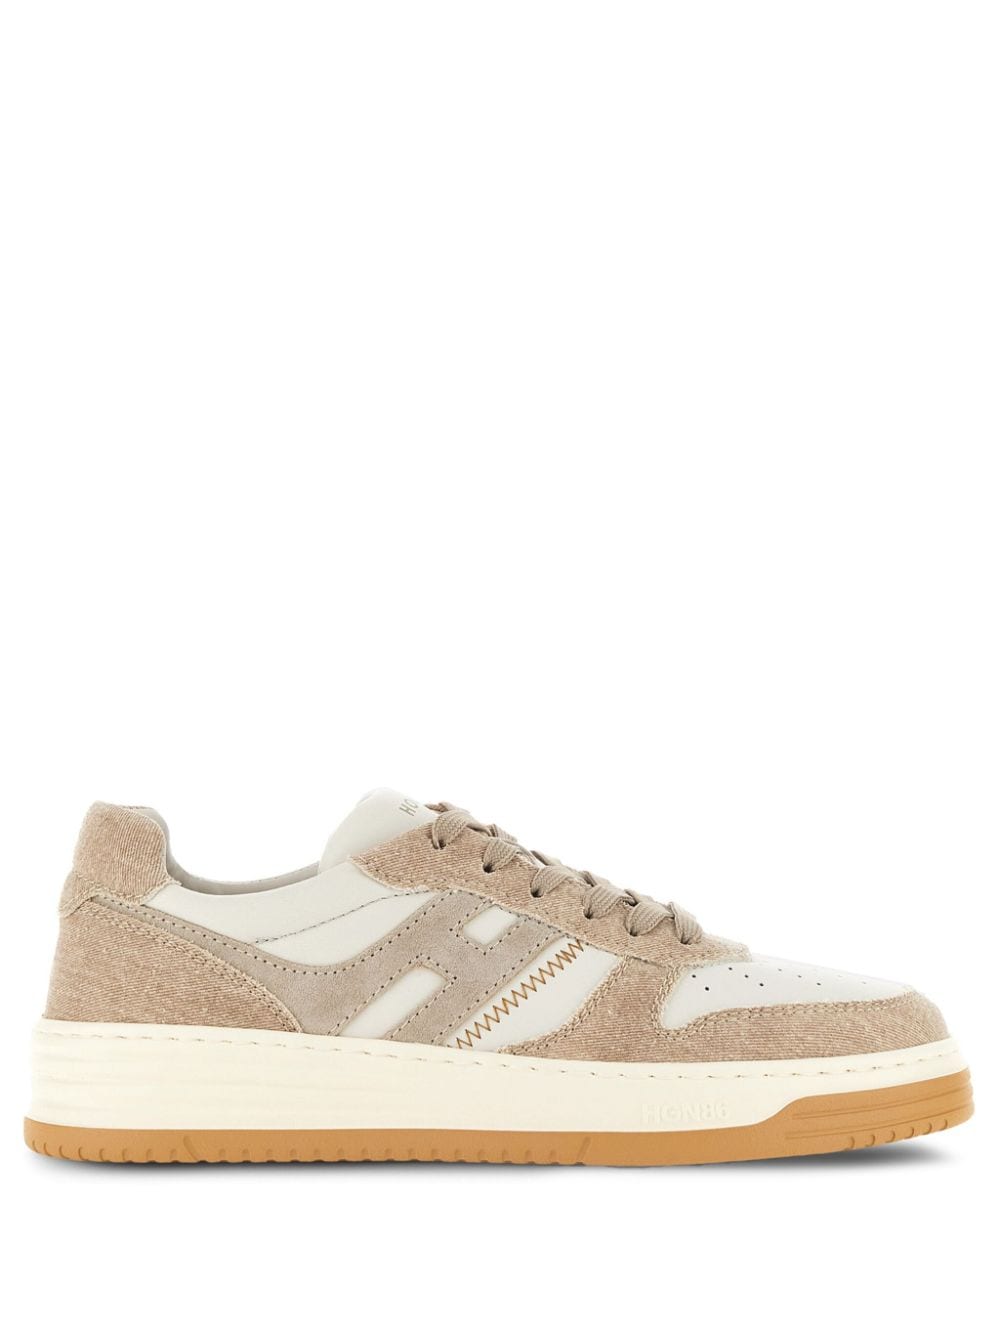 Hogan H630 Lace-up Leather Sneakers In Nude